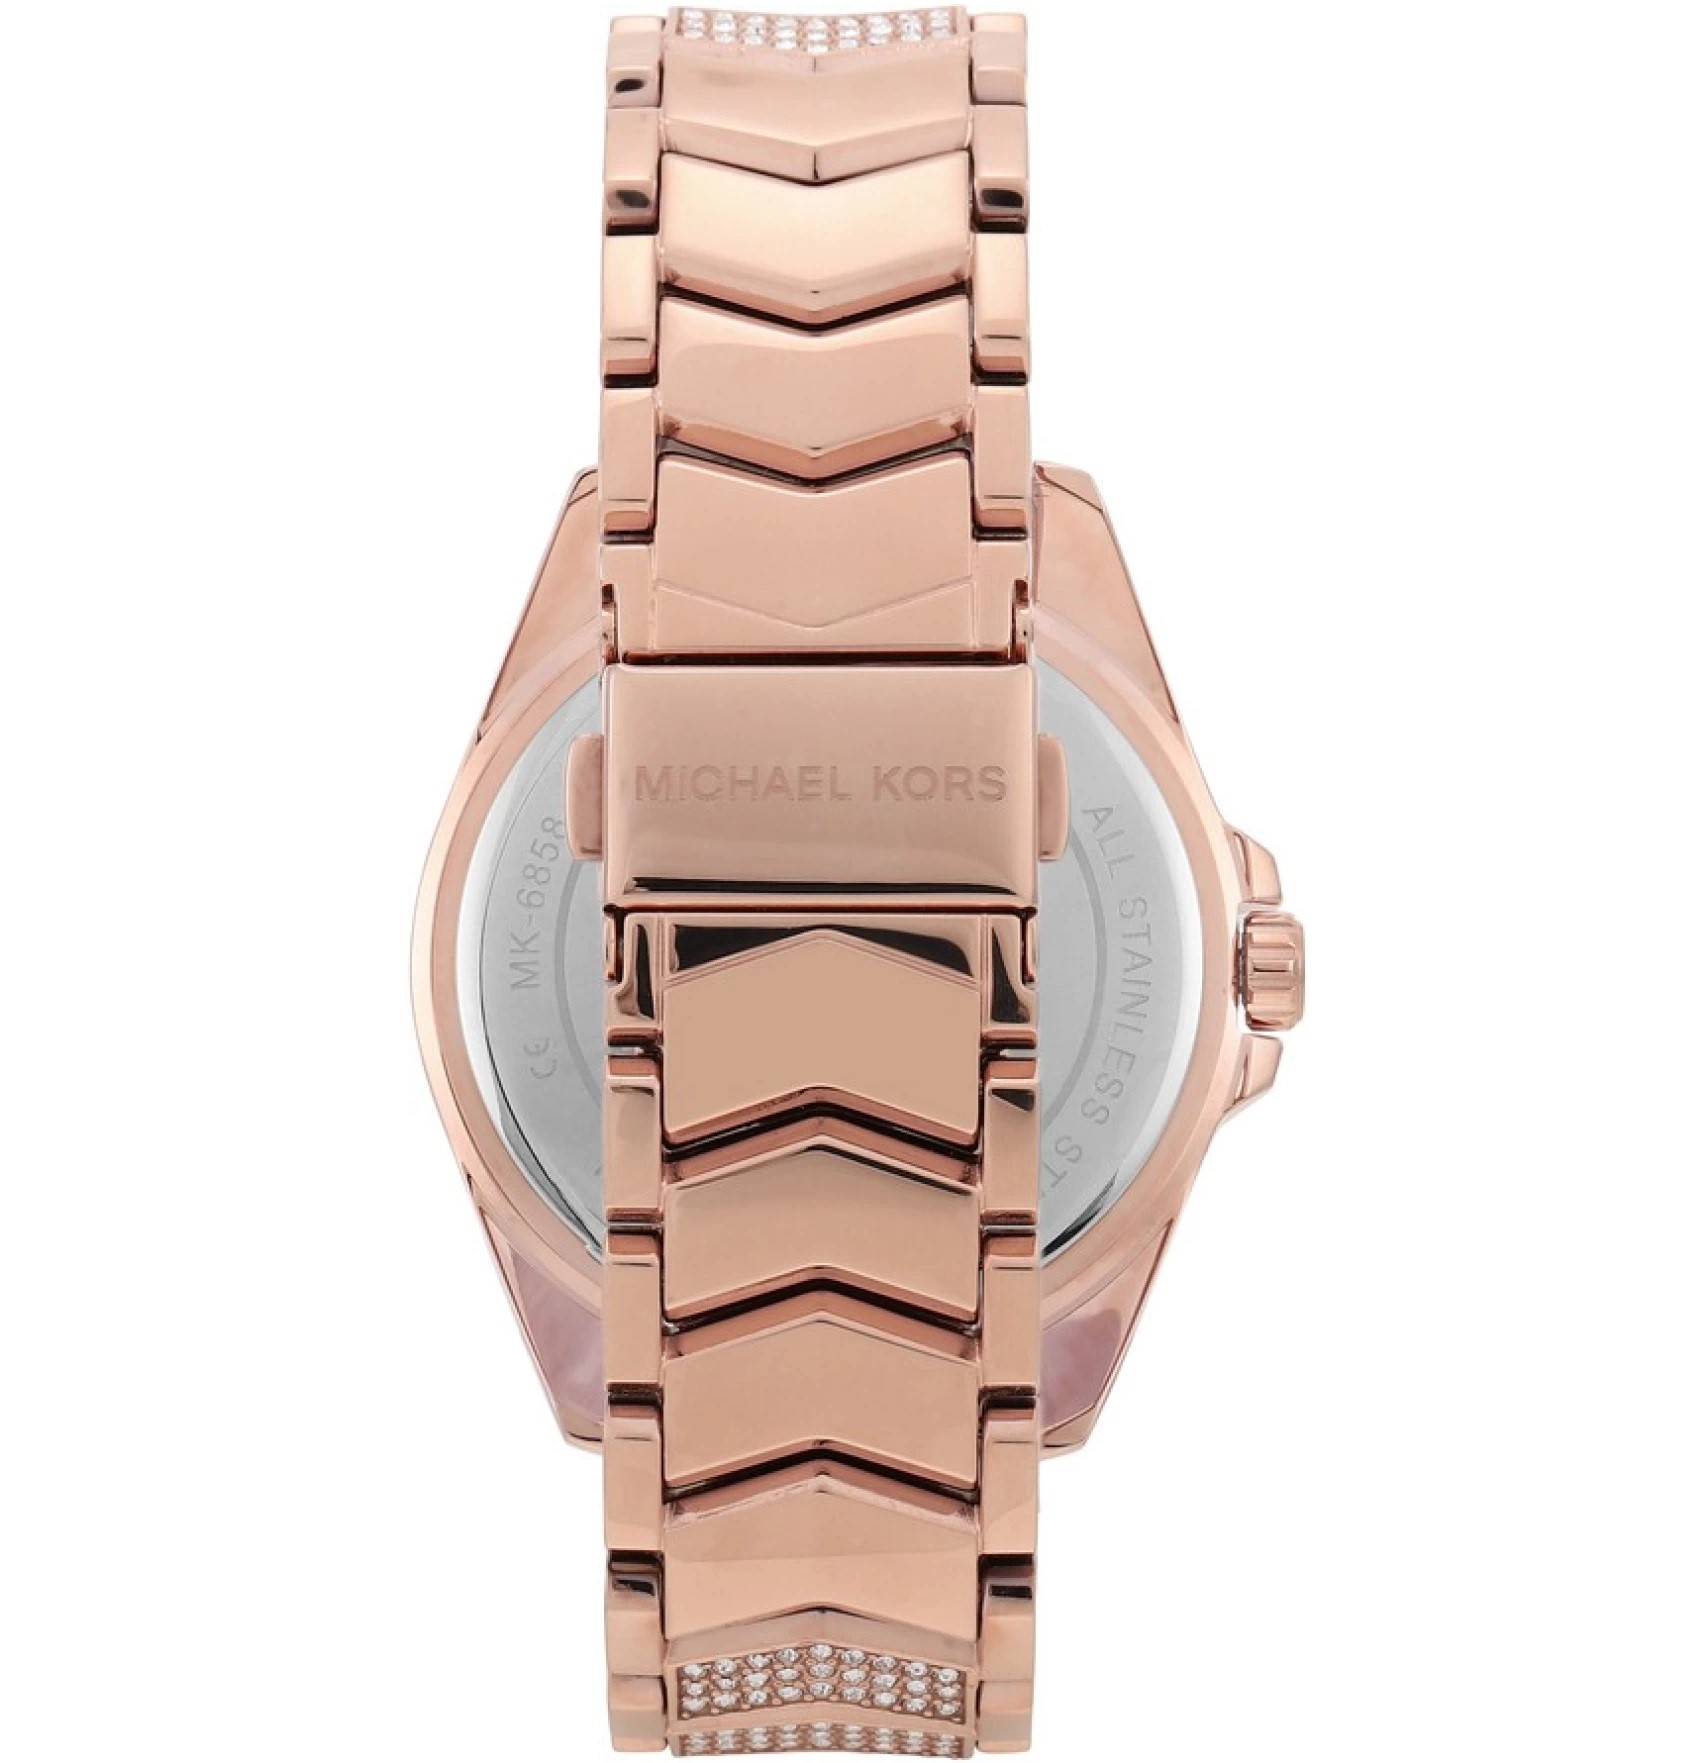 ĐỒNG HỒ ĐEO TAY DÂY KIM LOẠI MICHAEL KORS WHITNEY STAINLESS STEEL ANALOGUE WATCH MK6858 7